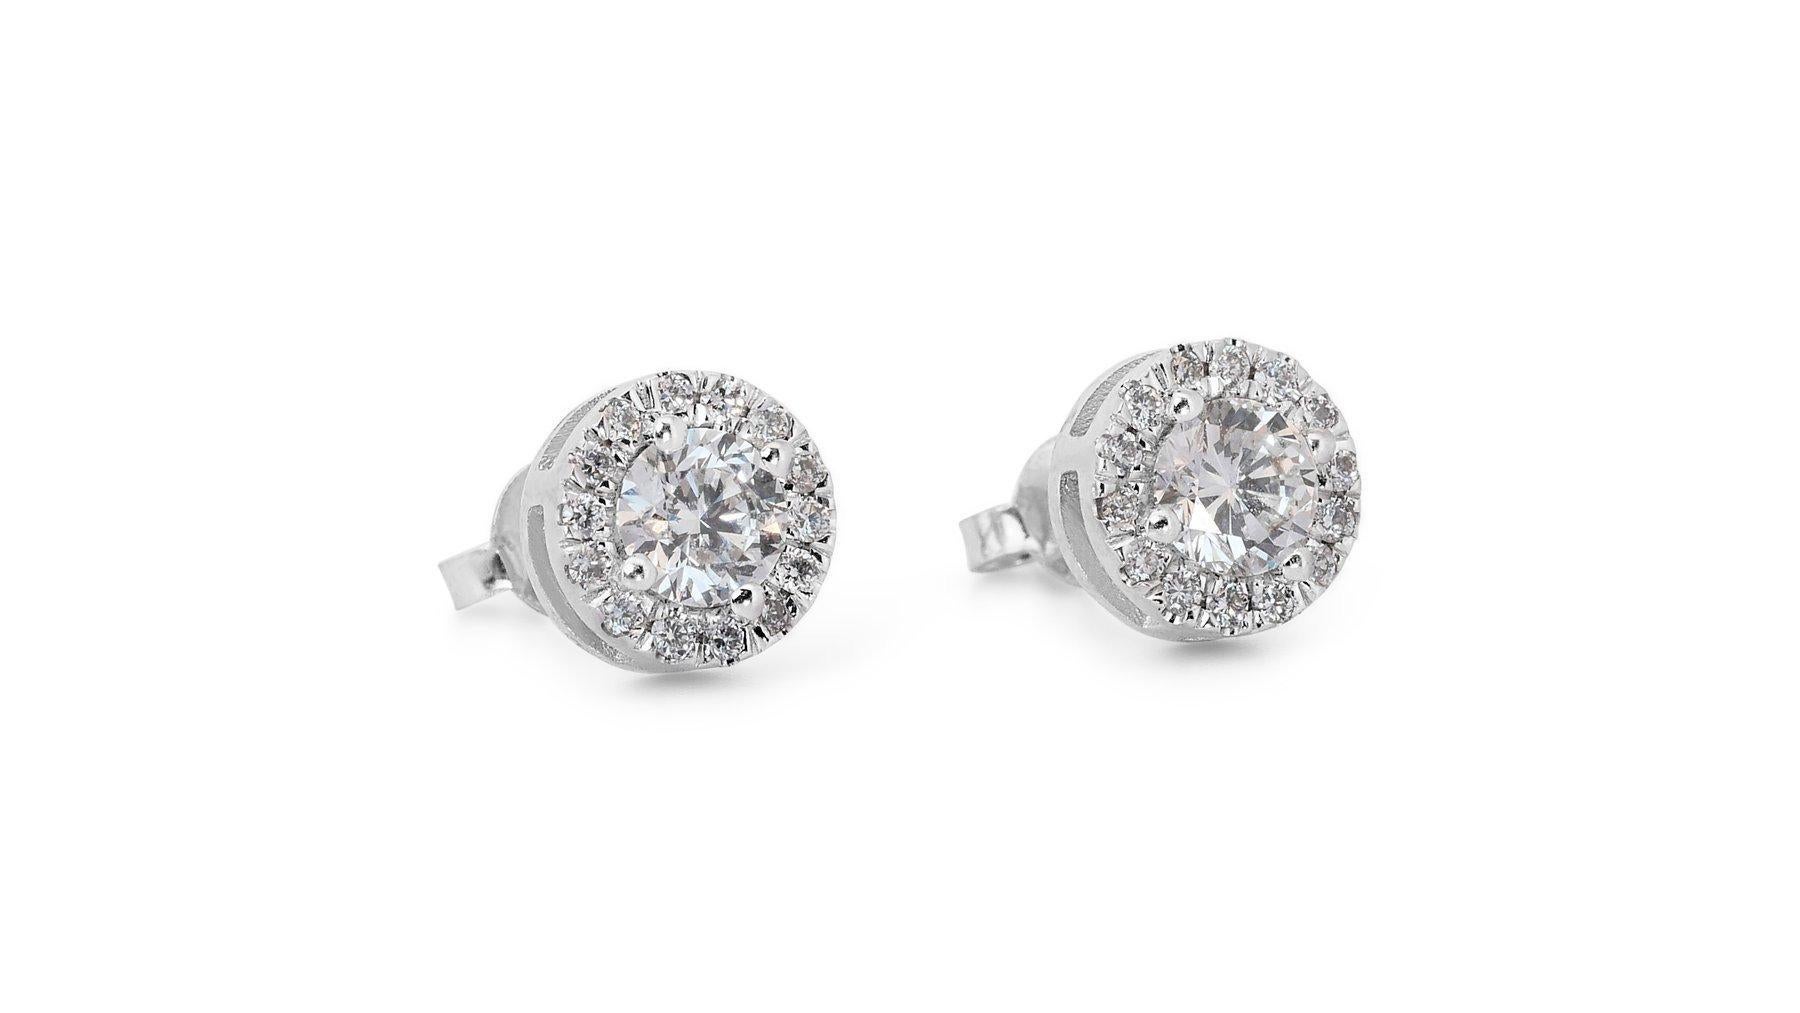 Elegant 1.68ct Diamond Halo Stud Earrings in 18k White Gold - GIA Certified

Experience luxury with these stunning 18k white gold diamond halo stud earrings. The main stones consist of two exquisite round diamonds with a total carat weight of